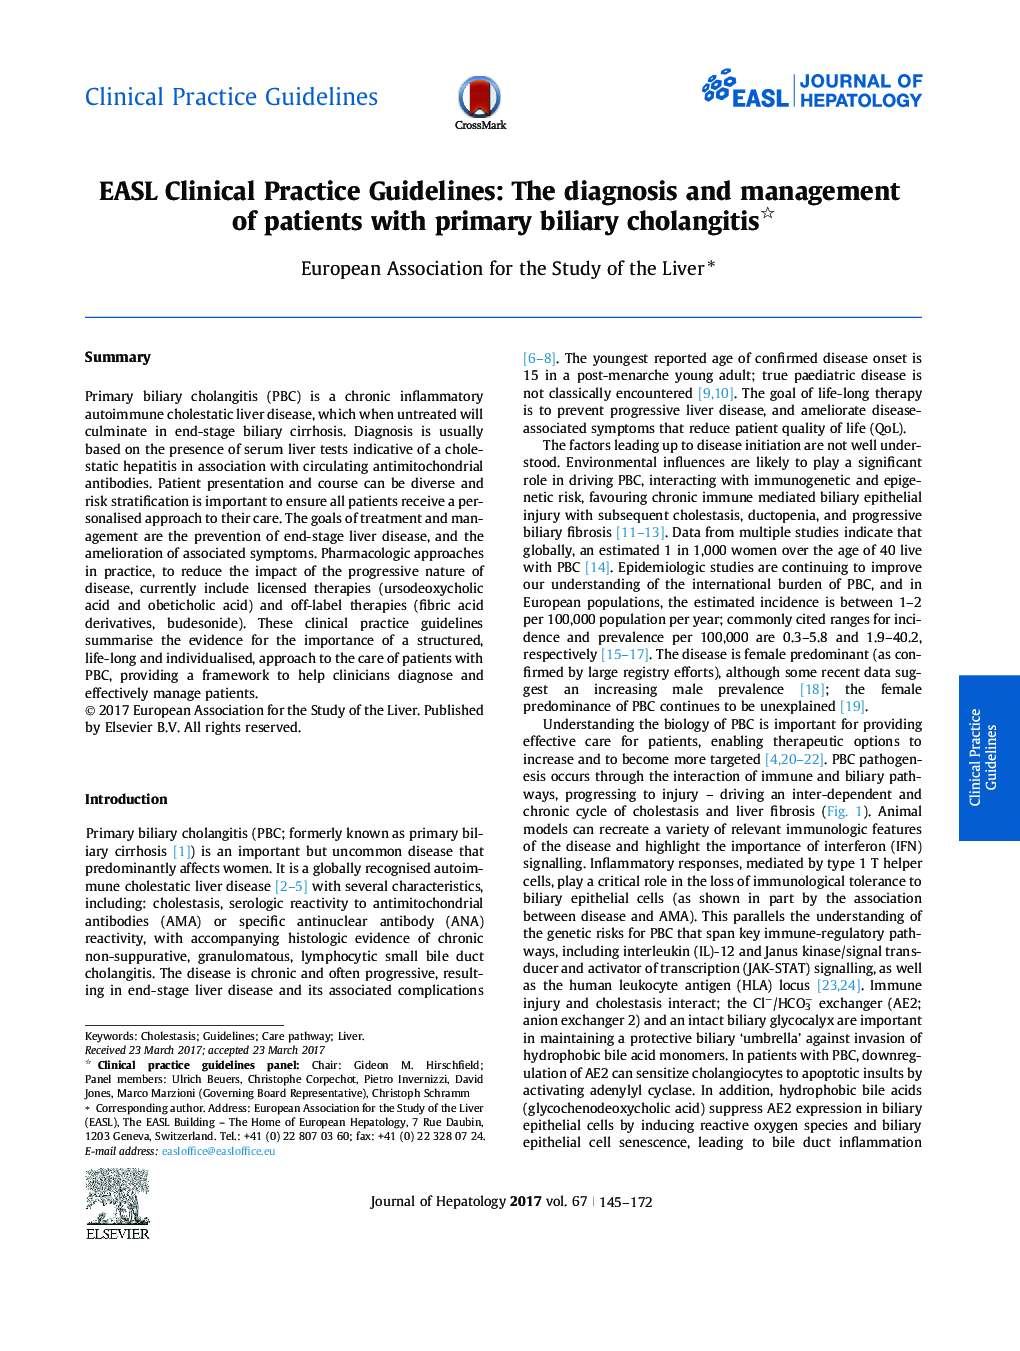 EASL Clinical Practice Guidelines: The diagnosis and management of patients with primary biliary cholangitis